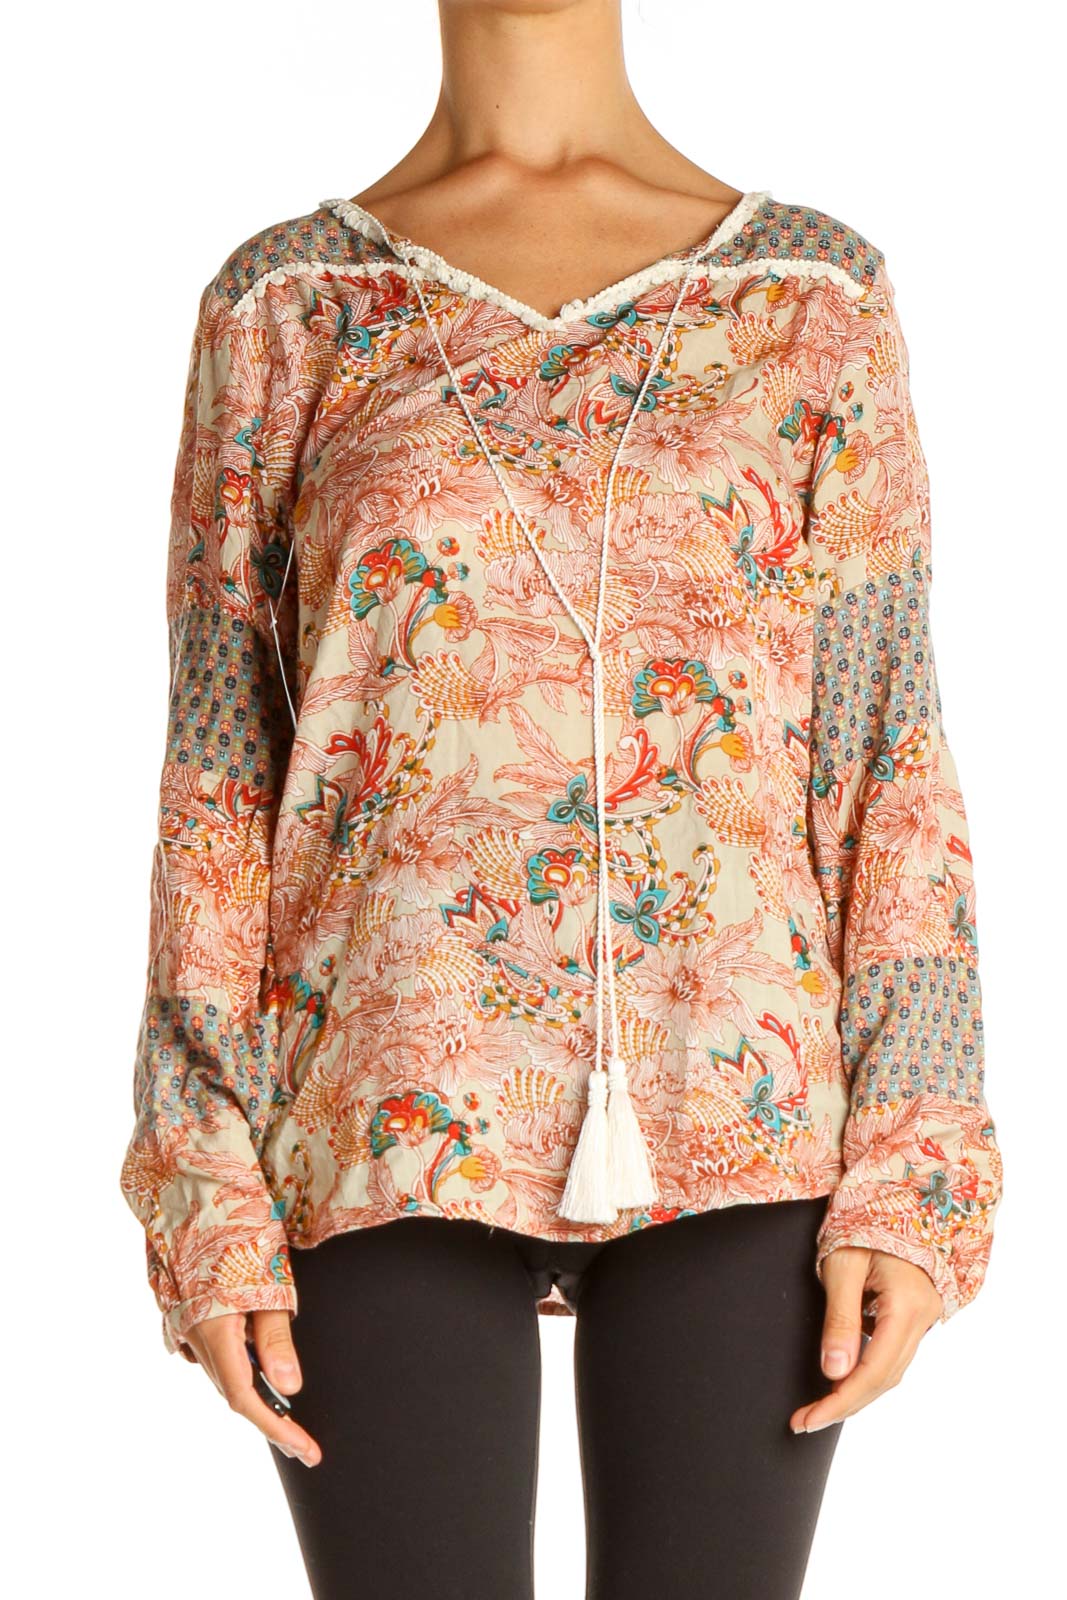 Beige Printed Bohemian Blouse Front